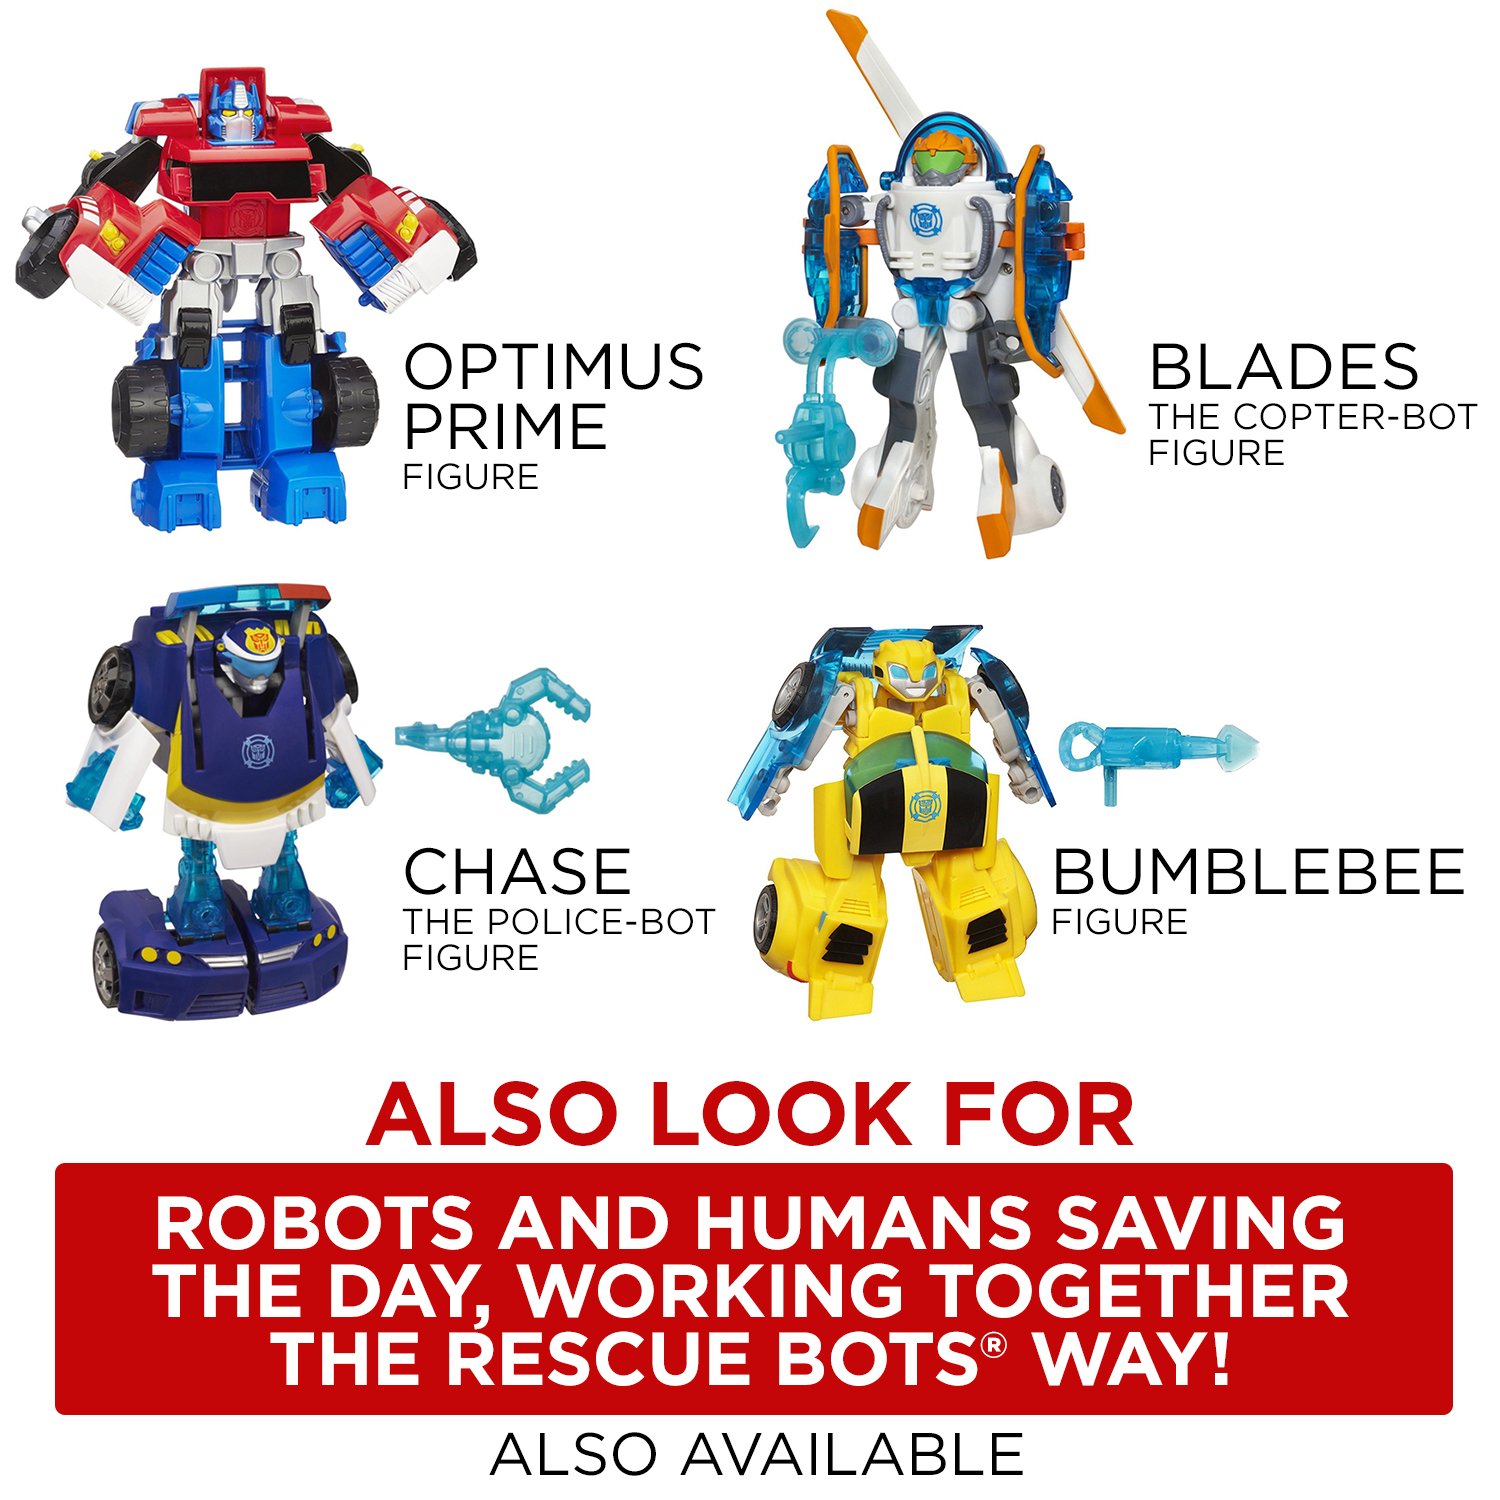 Playskool Heroes Transformers Rescue Bots Energize Heatwave The Fire Bot Converting Toy Robot Action Figure, Toys For Kids Ages 3 And Up (Amazon Exclusive)